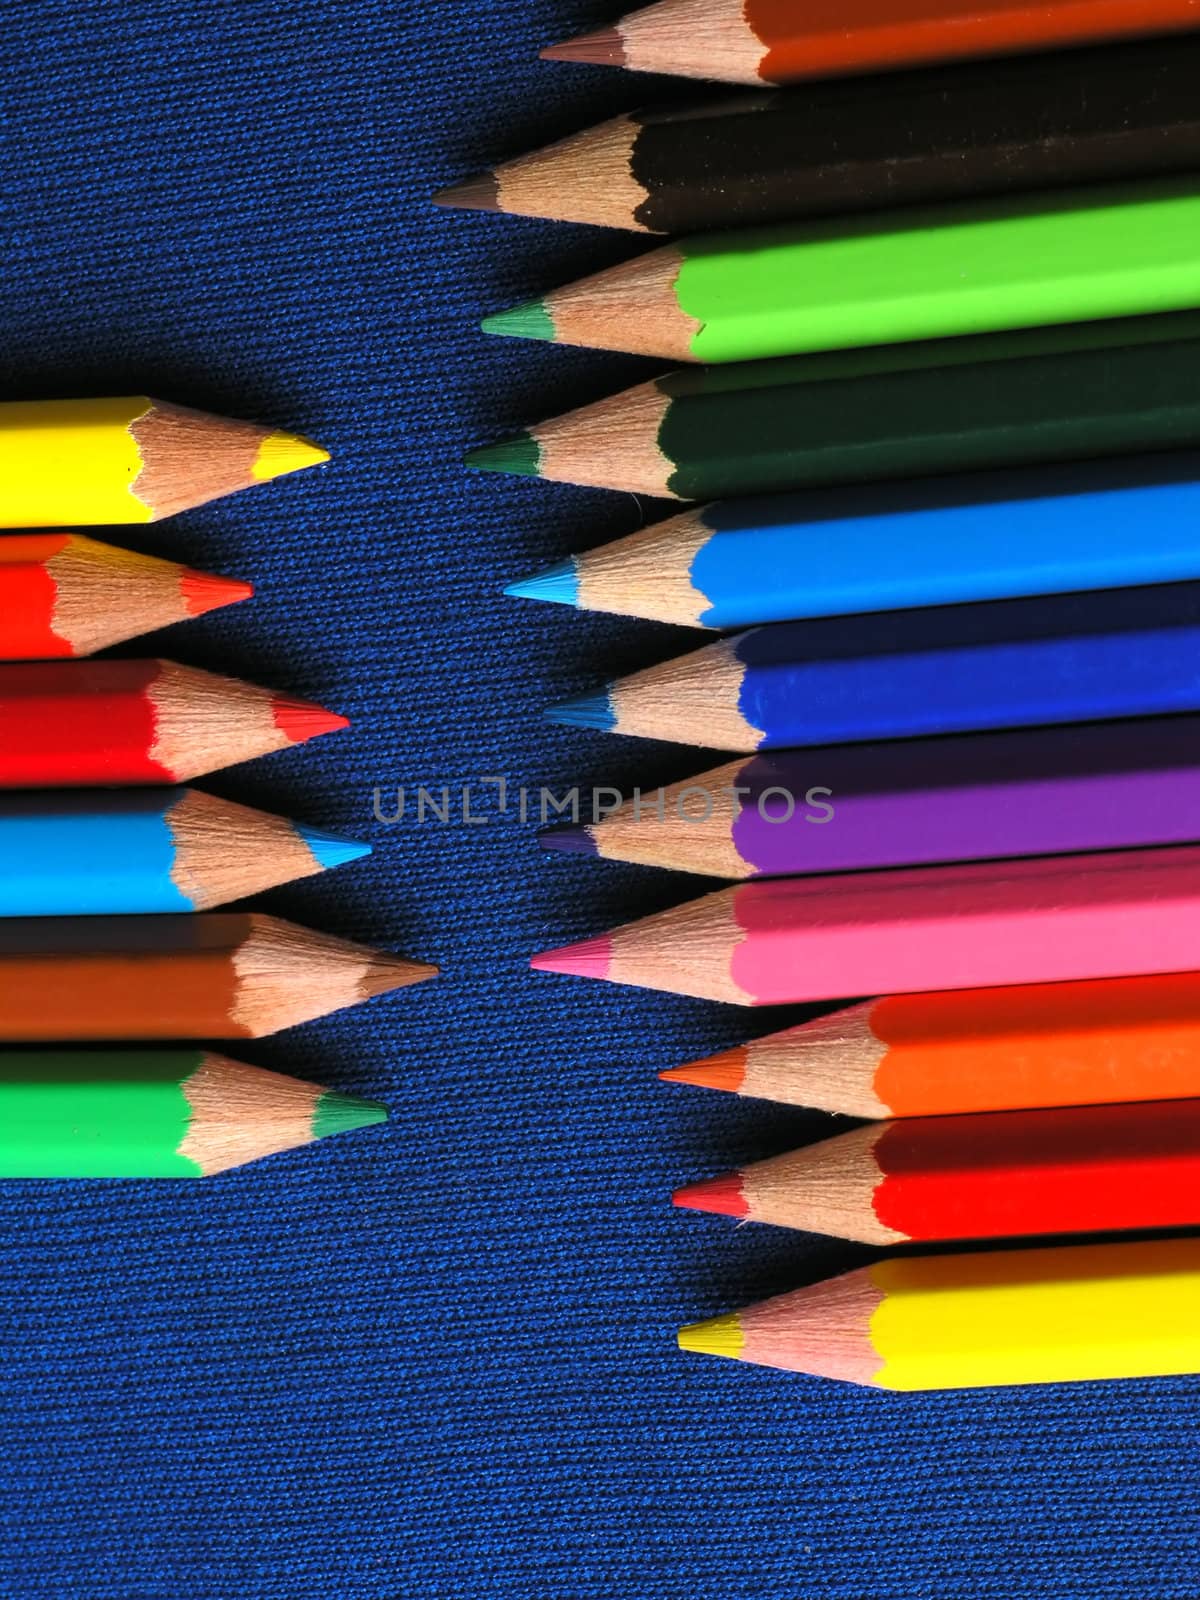 Colored Pencils in a Row by adamr